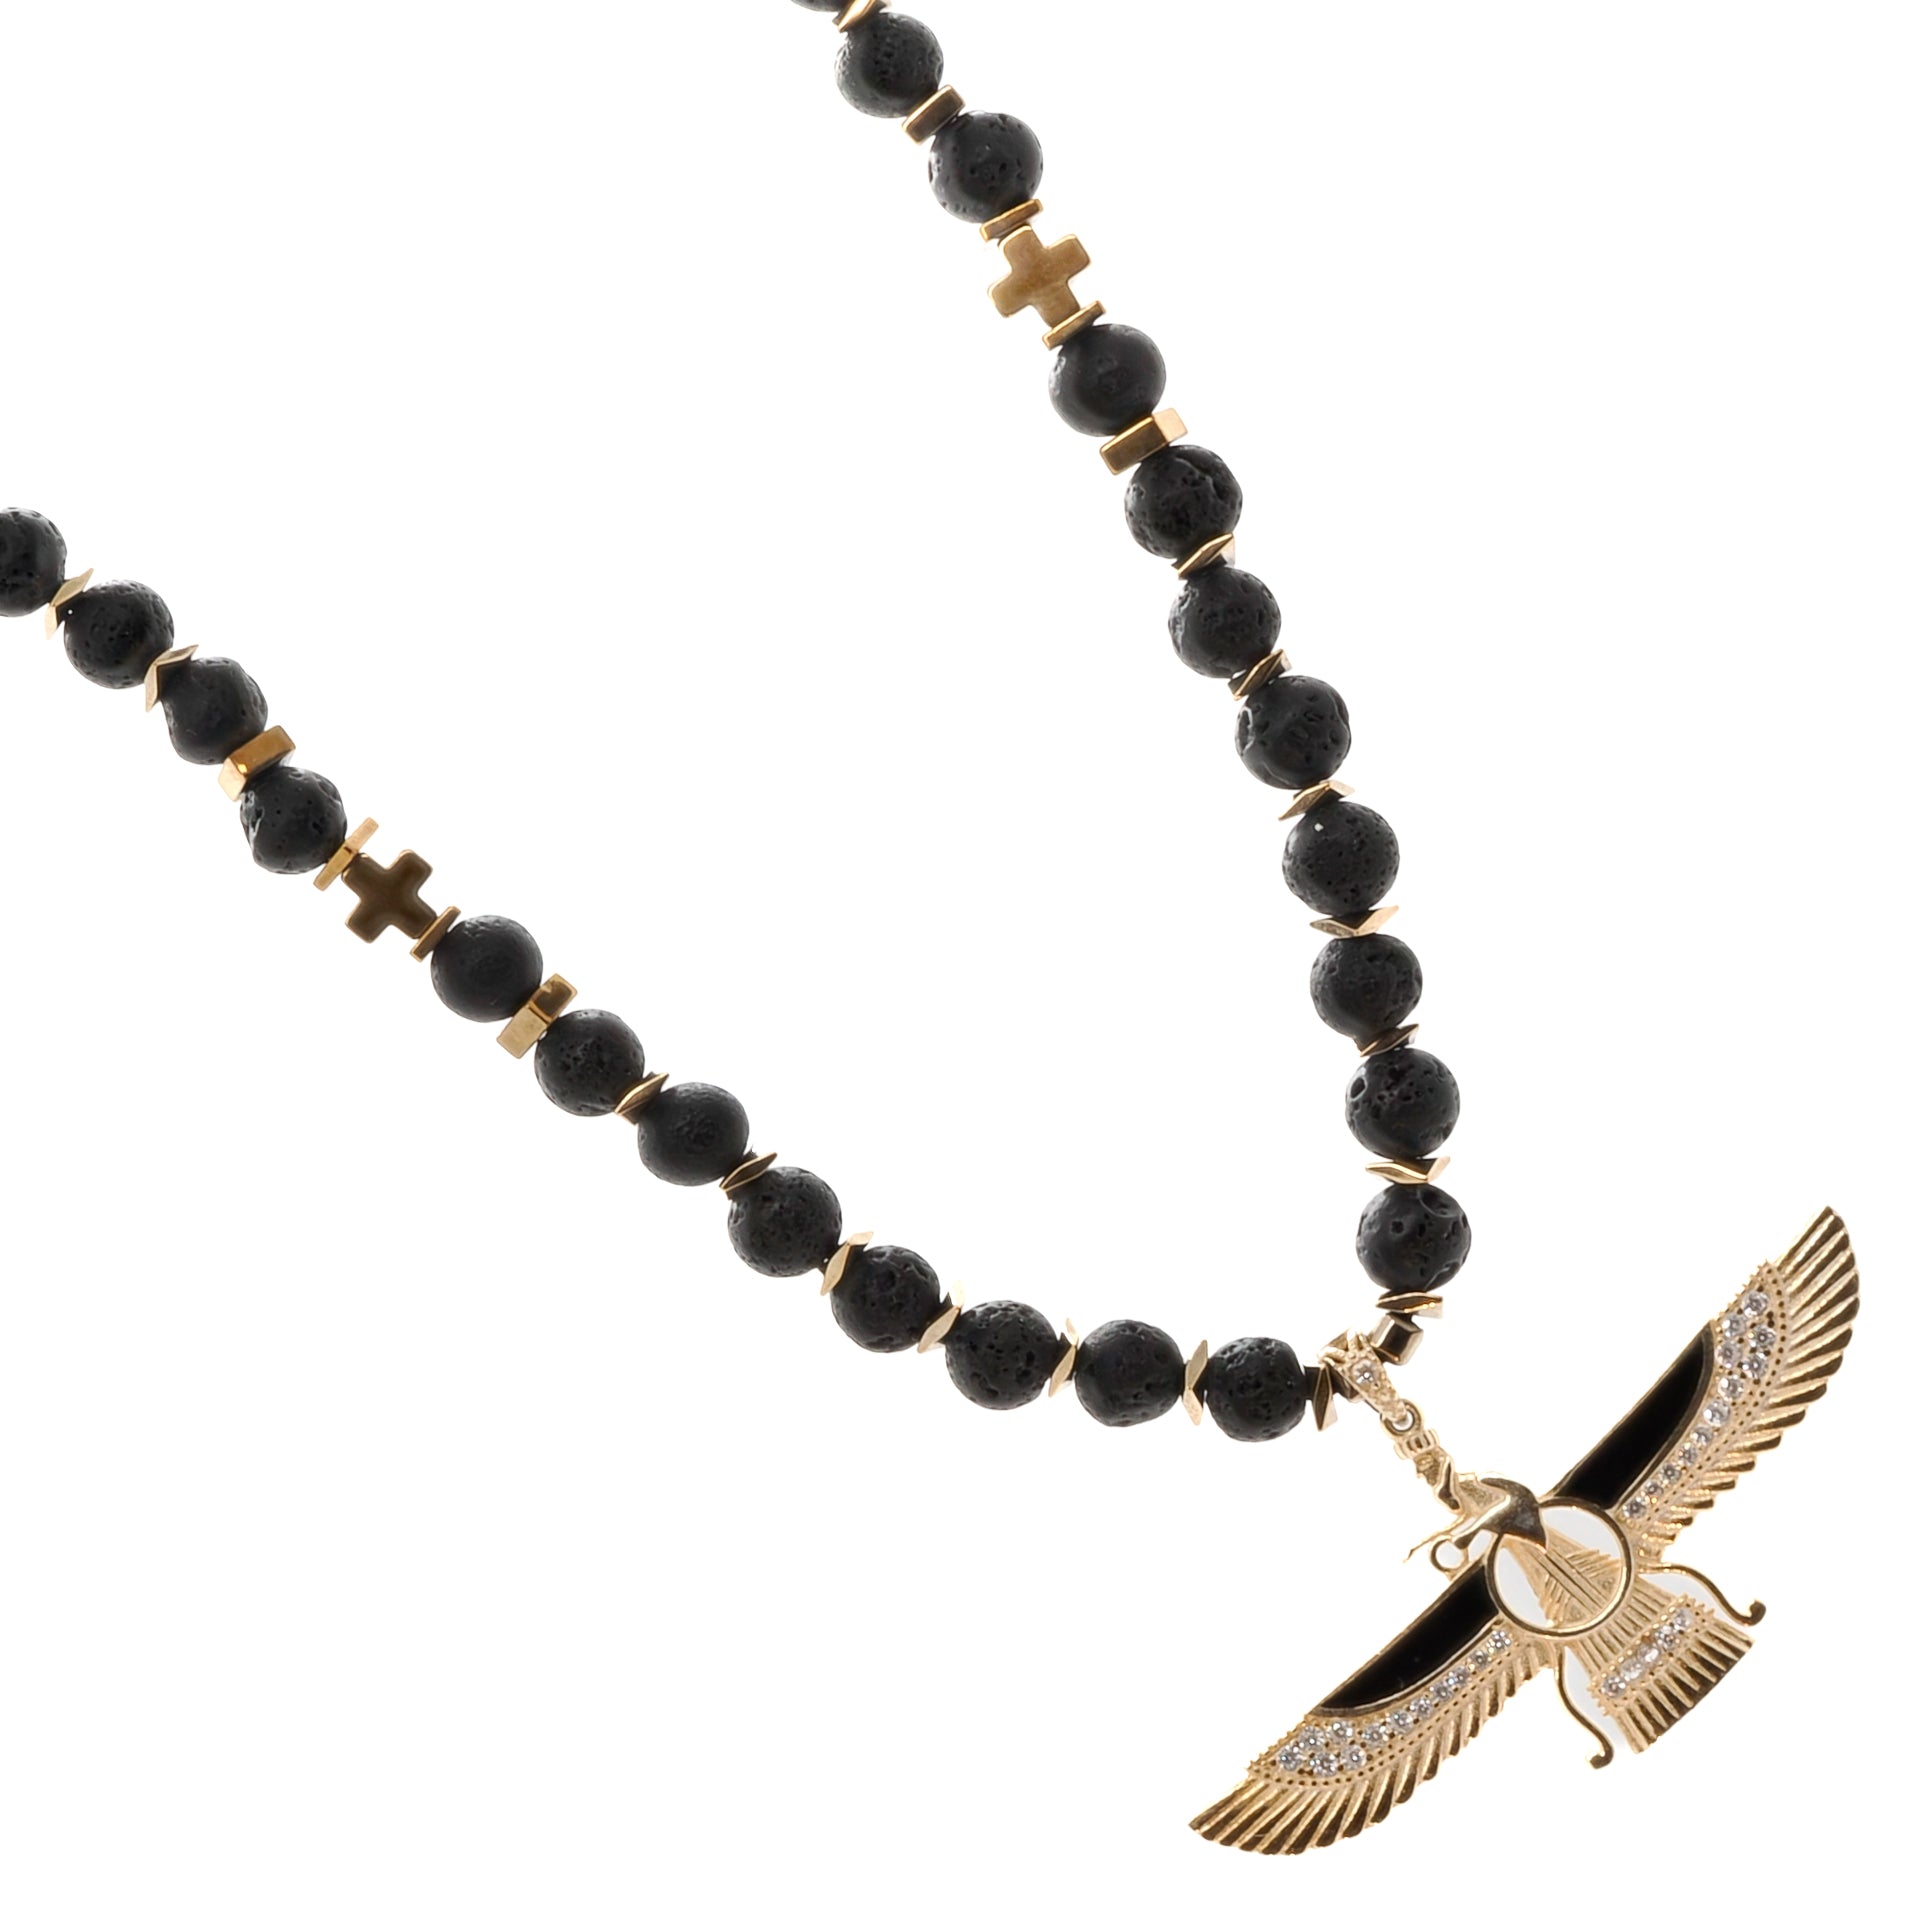 Handmade Faravahar Necklace with Gold and Onyx - Elevate your look with a touch of ancient mysticism.